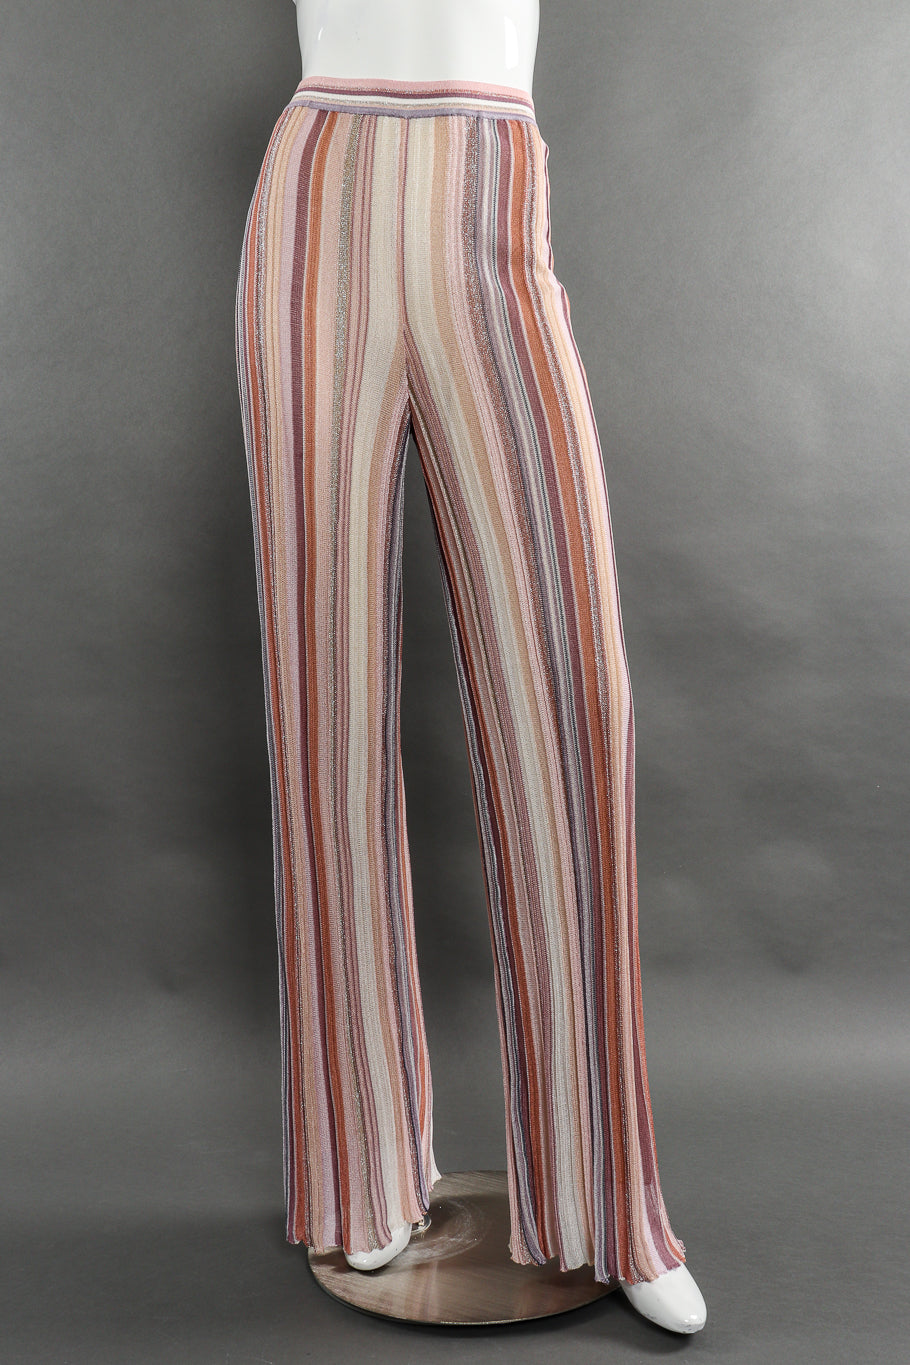 Missoni Striped Knit Duster, Tank, and Pants Set front view of pant on mannequin @Recessla